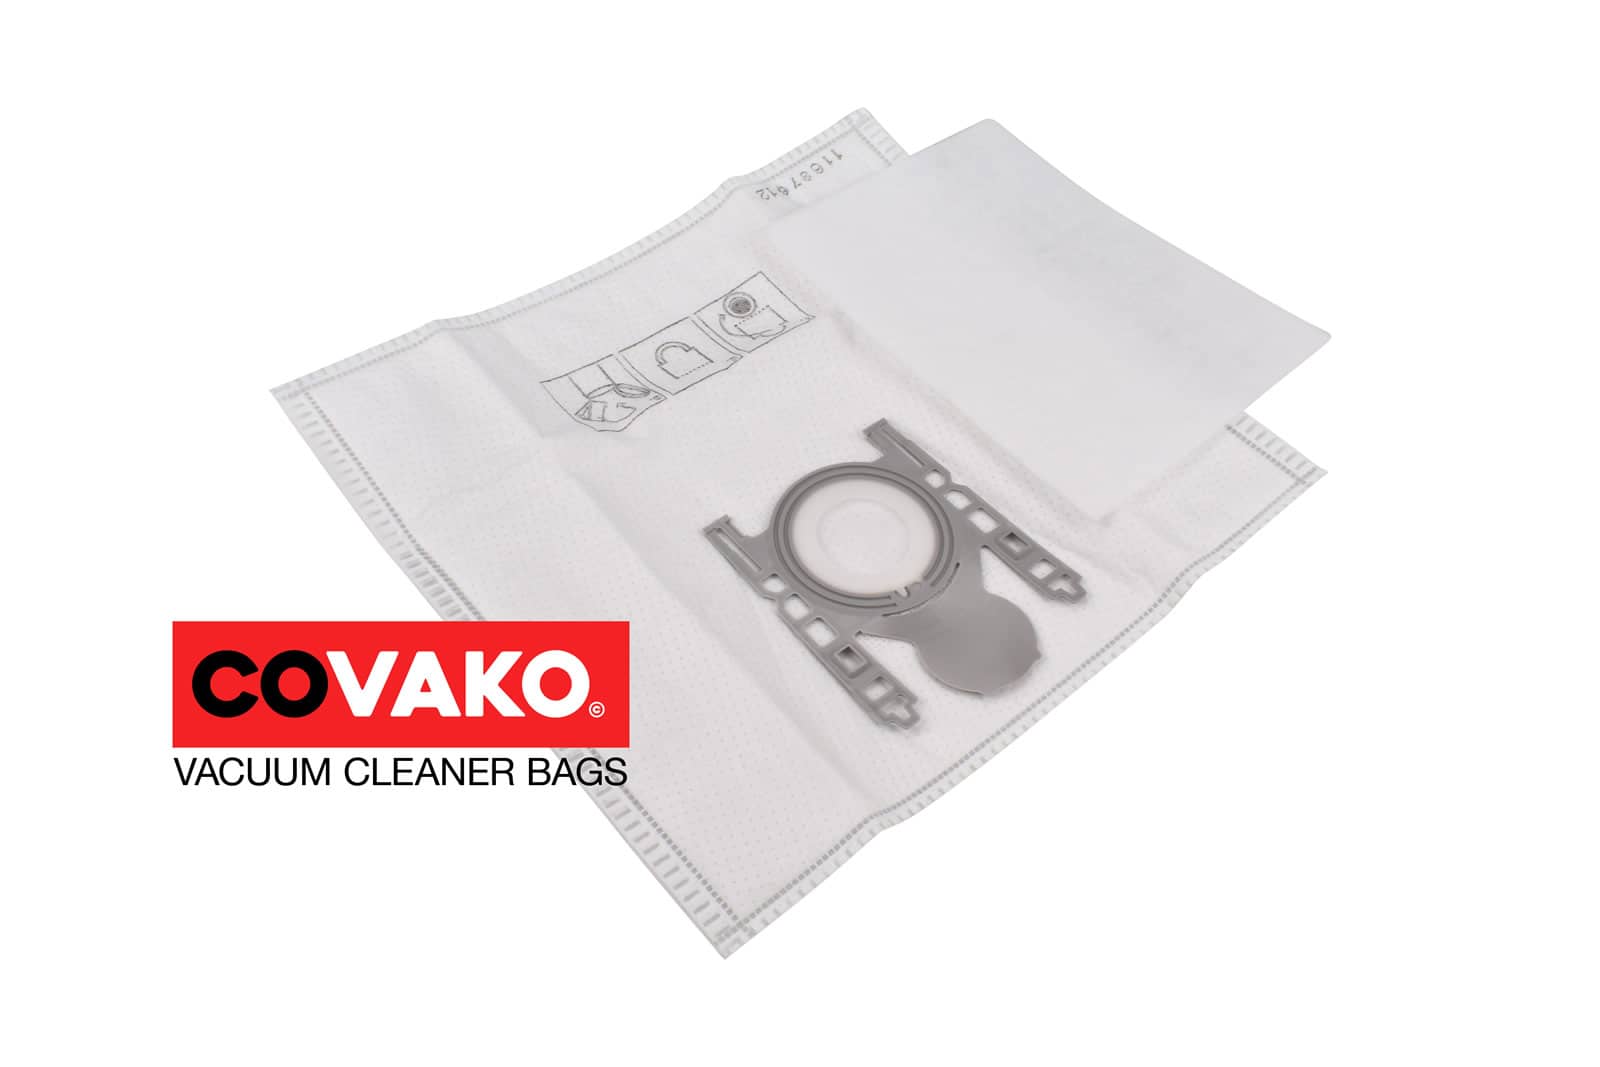 Bosch BBS 7000-7999 / Synthesis - Bosch vacuum cleaner bags